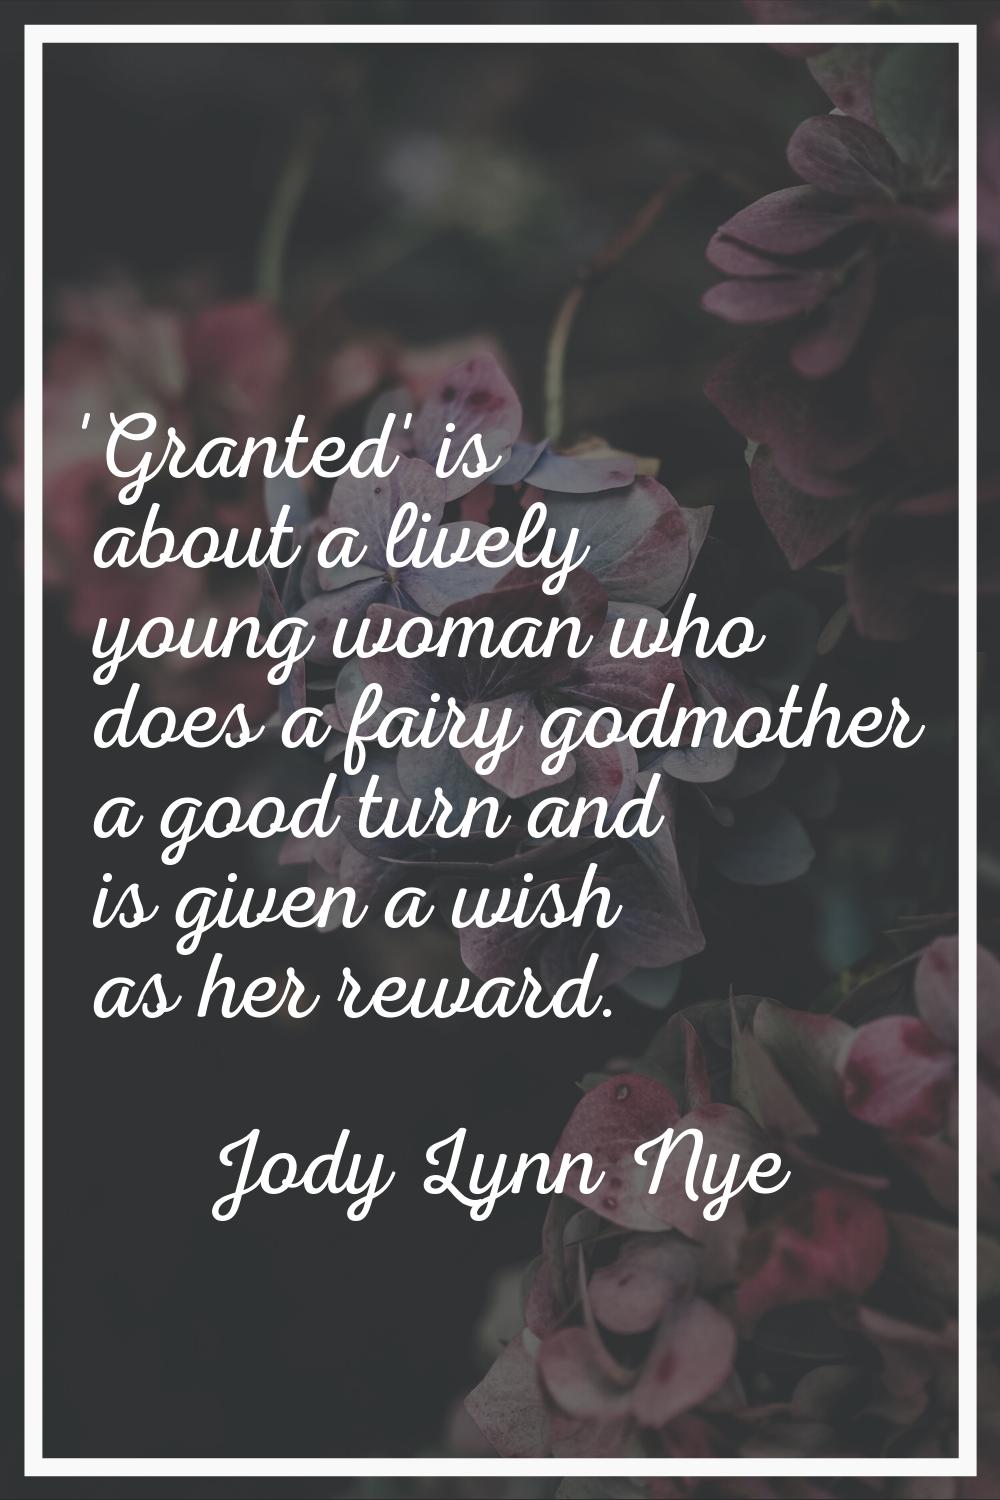 'Granted' is about a lively young woman who does a fairy godmother a good turn and is given a wish 